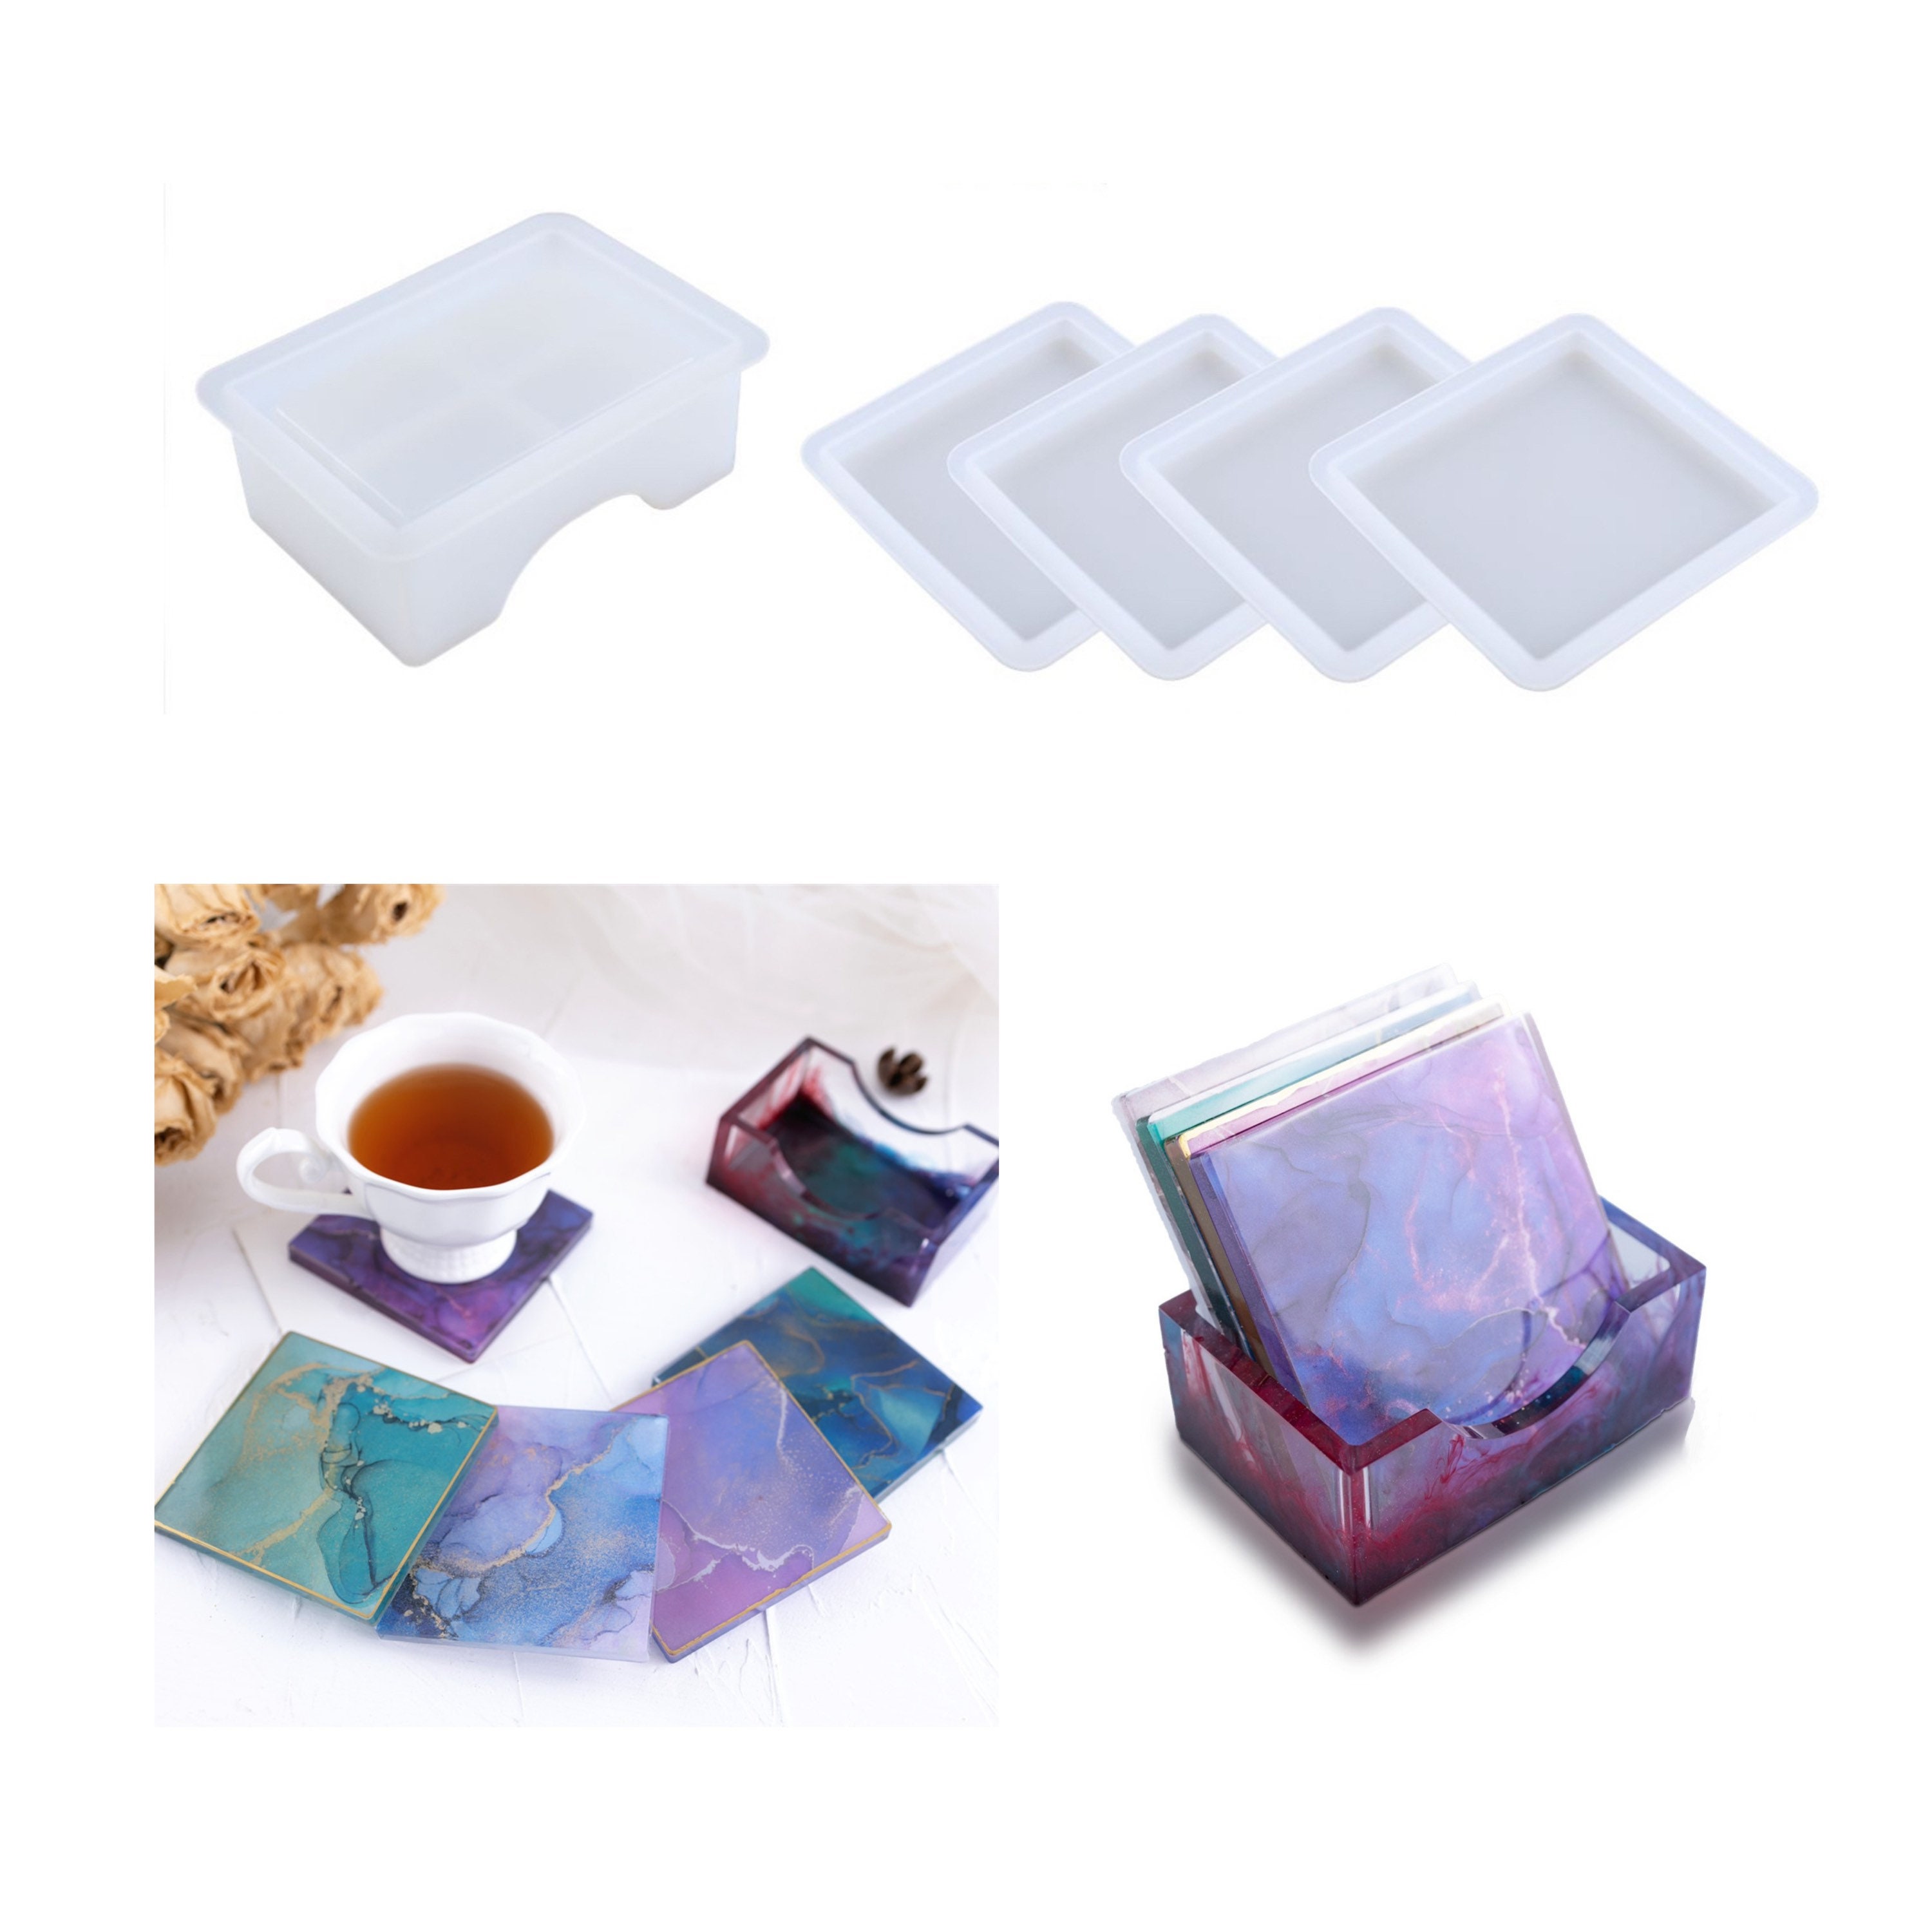 4 PCS Thickened Coaster Resin Molds, Coaster Silicone Molds for Epoxy Resin,  Coaster Molds for Resin Casting, Epoxy Resin Molds for DIY Resin Coasters  Bowl mats, Candle Holders, Home Decoration. 4pcs